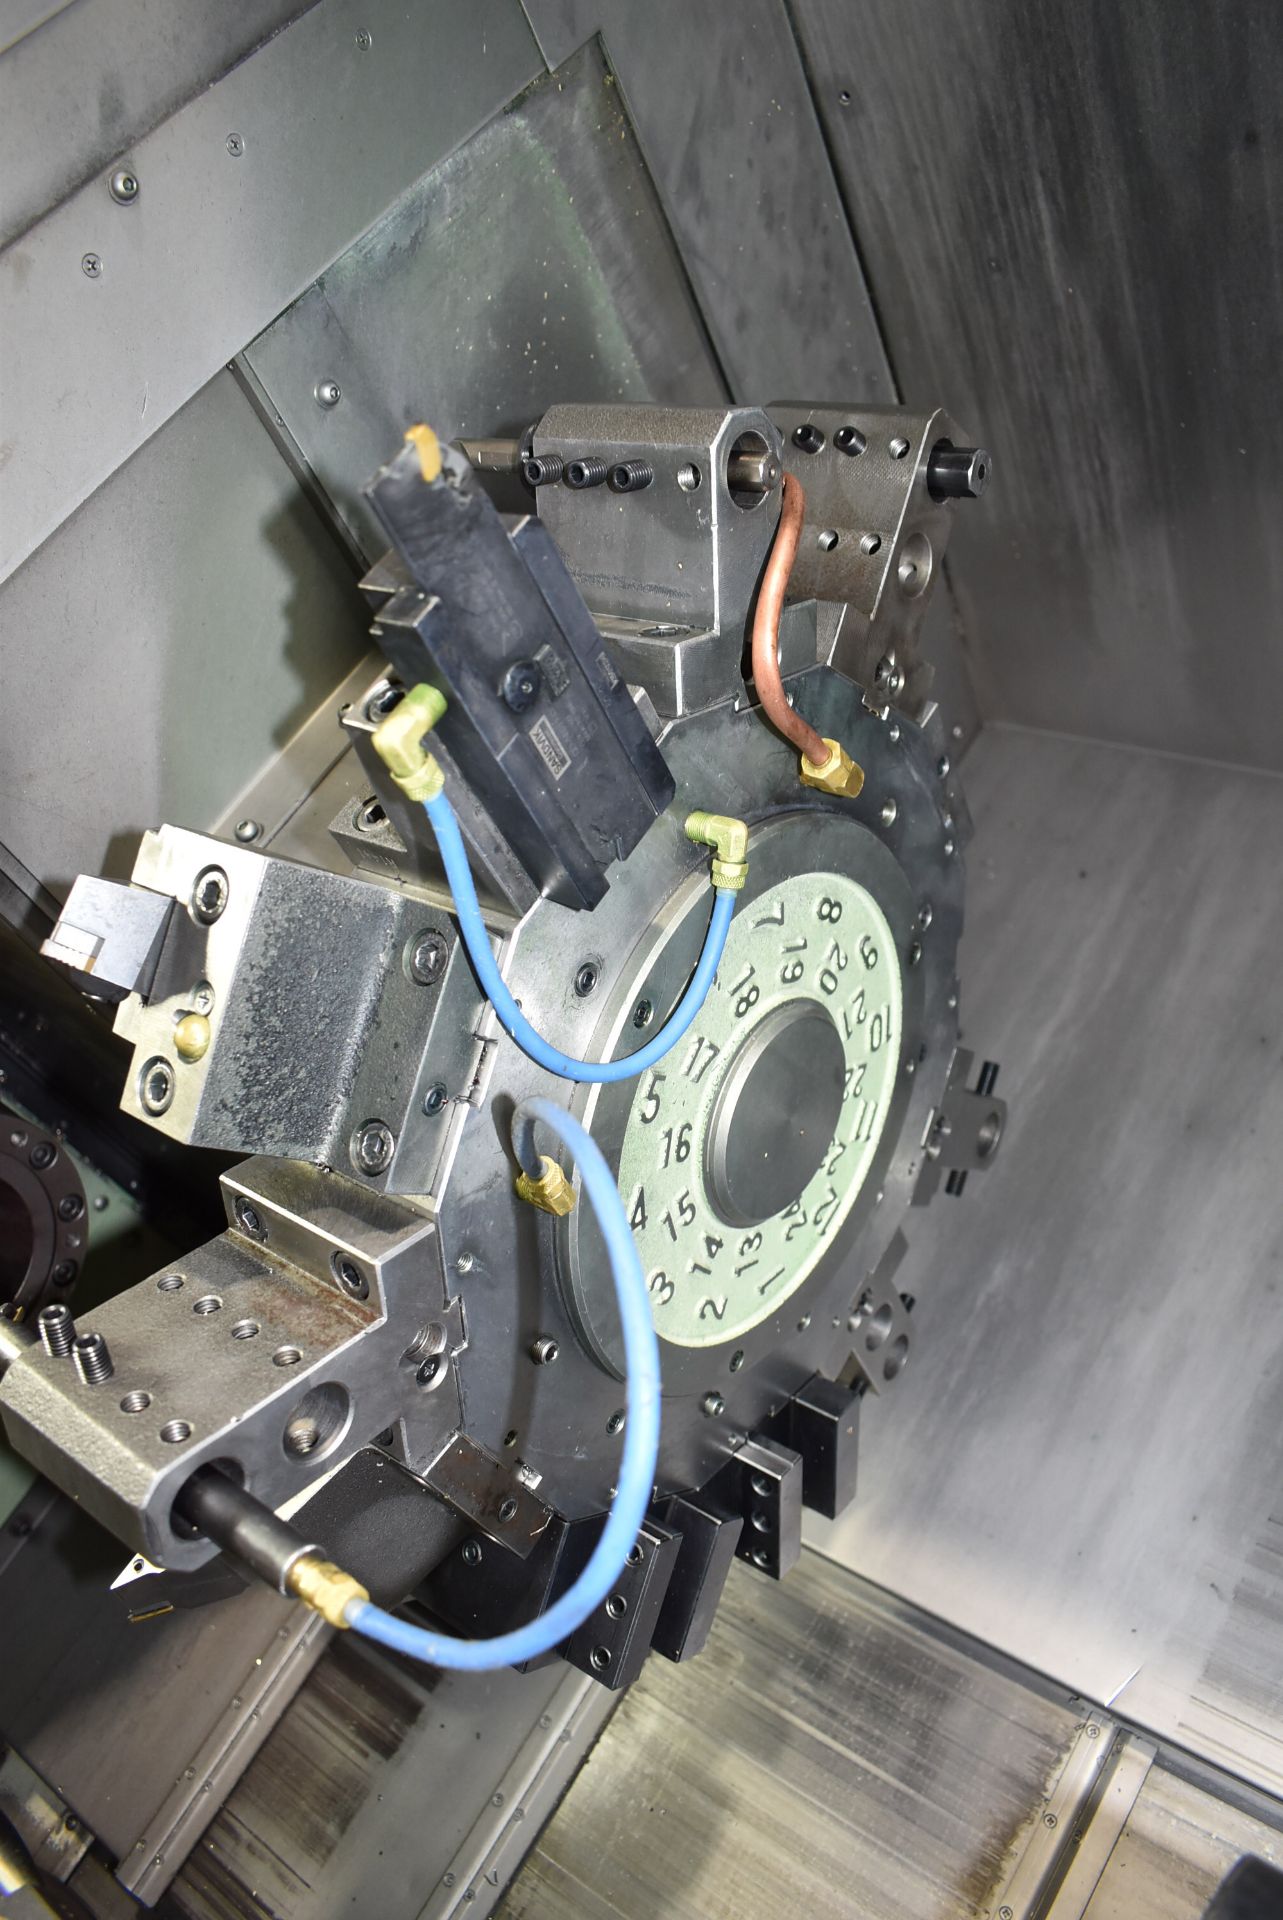 NAKAMURA-TOME (2013) WT-250 II S MULTI-AXIS OPPOSED SPINDLE AND TWIN TURRET CNC MULTI-TASKING CENTER - Image 3 of 21